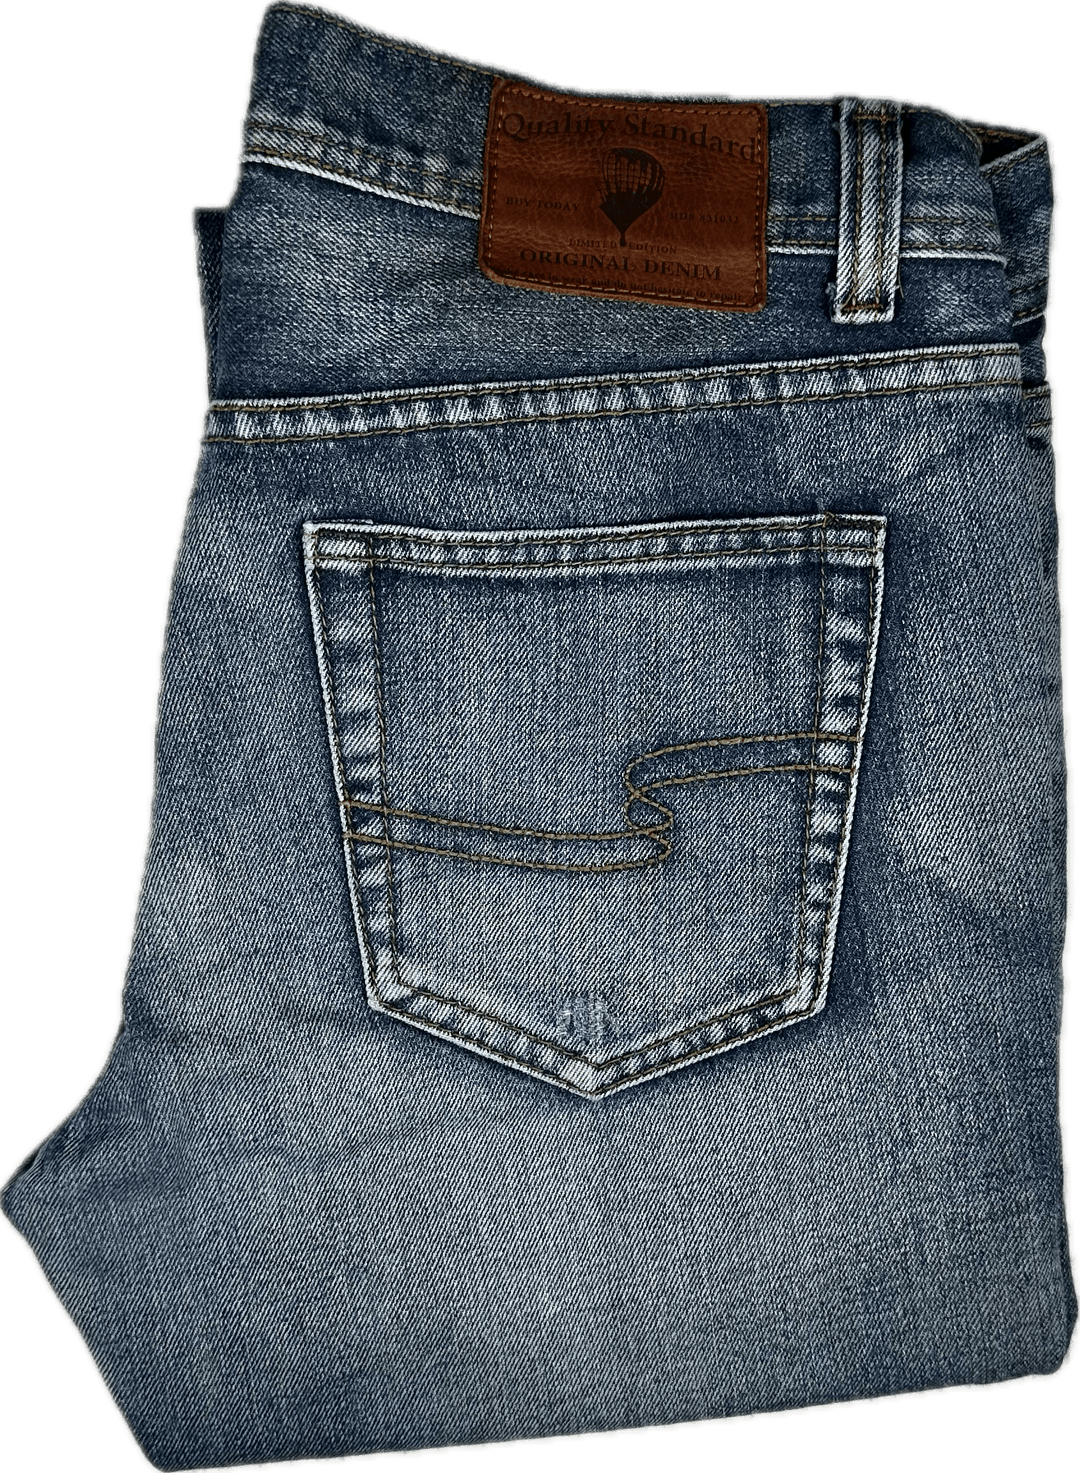 Quality Standard Mens Distressed Finish Jeans -Size 32 - Jean Pool